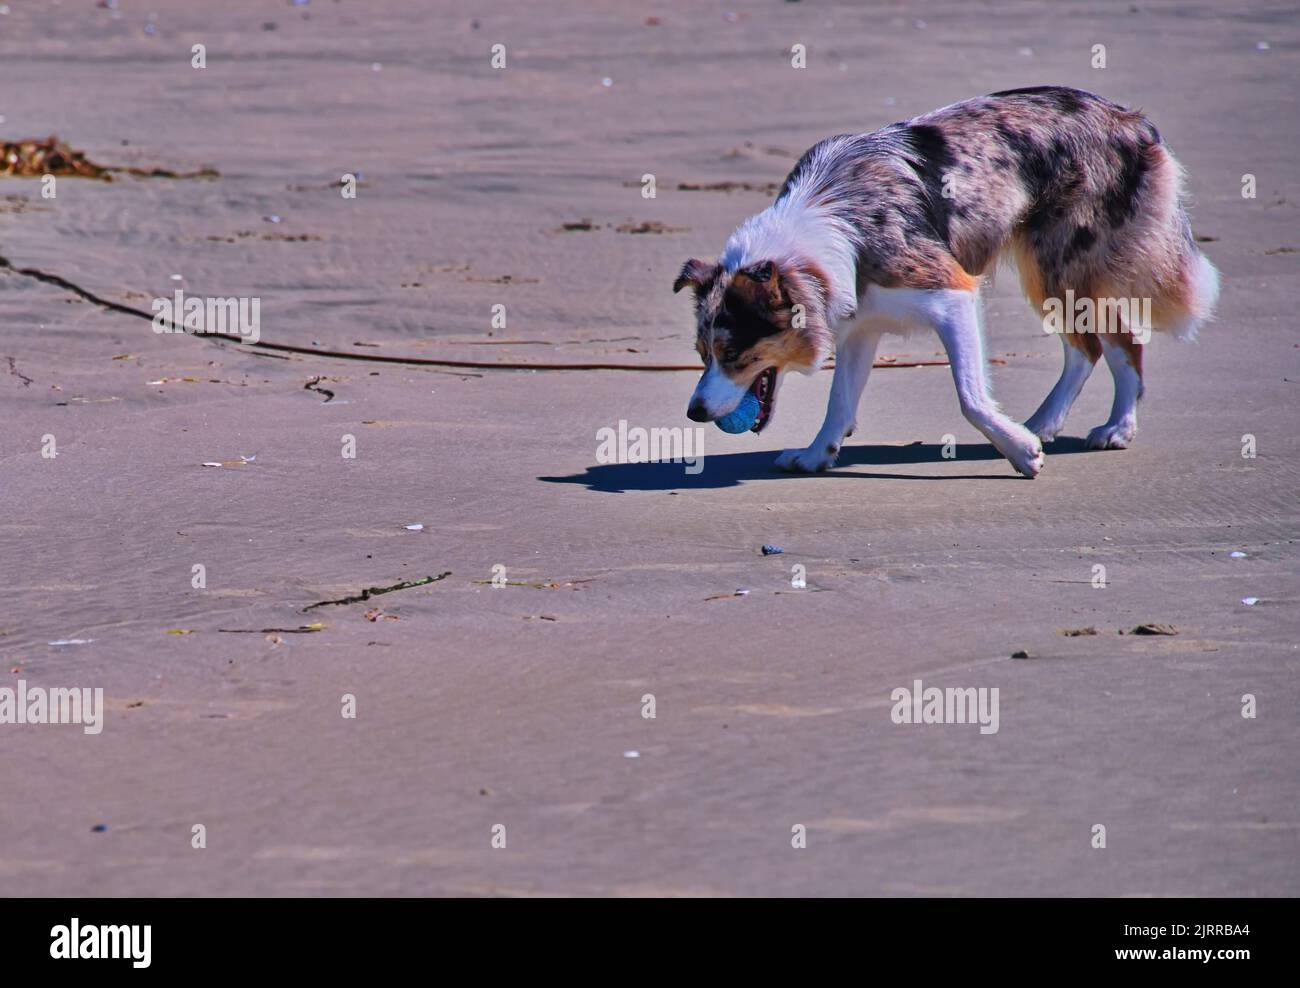 Cute dog playing on the beach Stock Photo